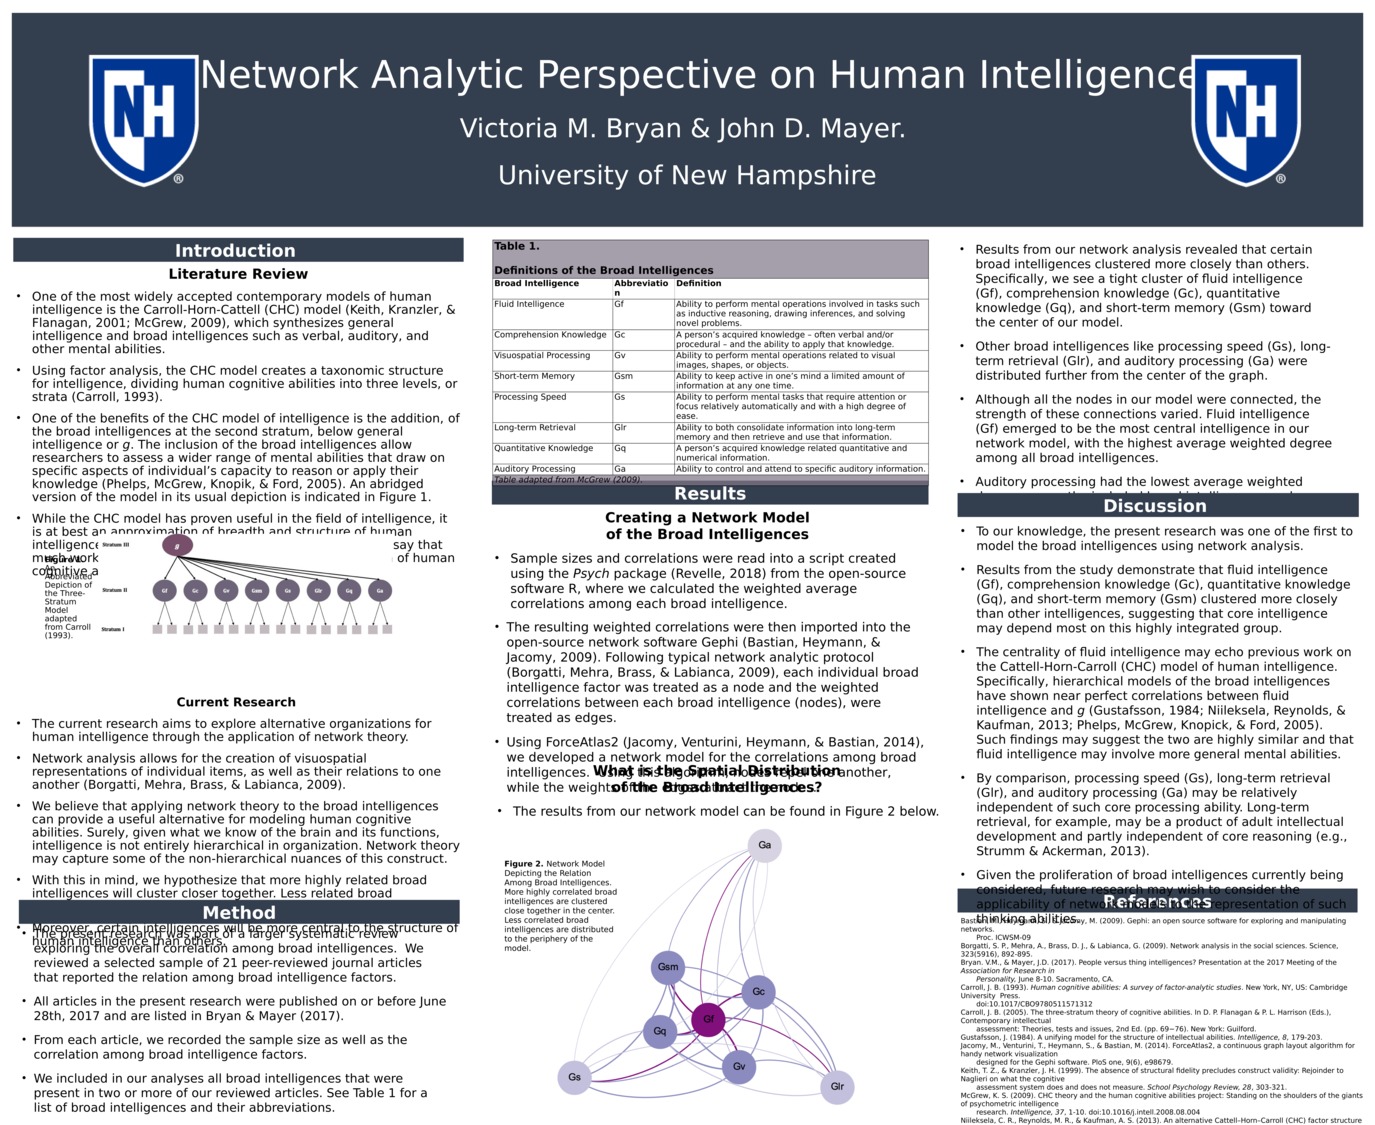 A Network Analytic Approach To Human Intelligence  by vmb1007